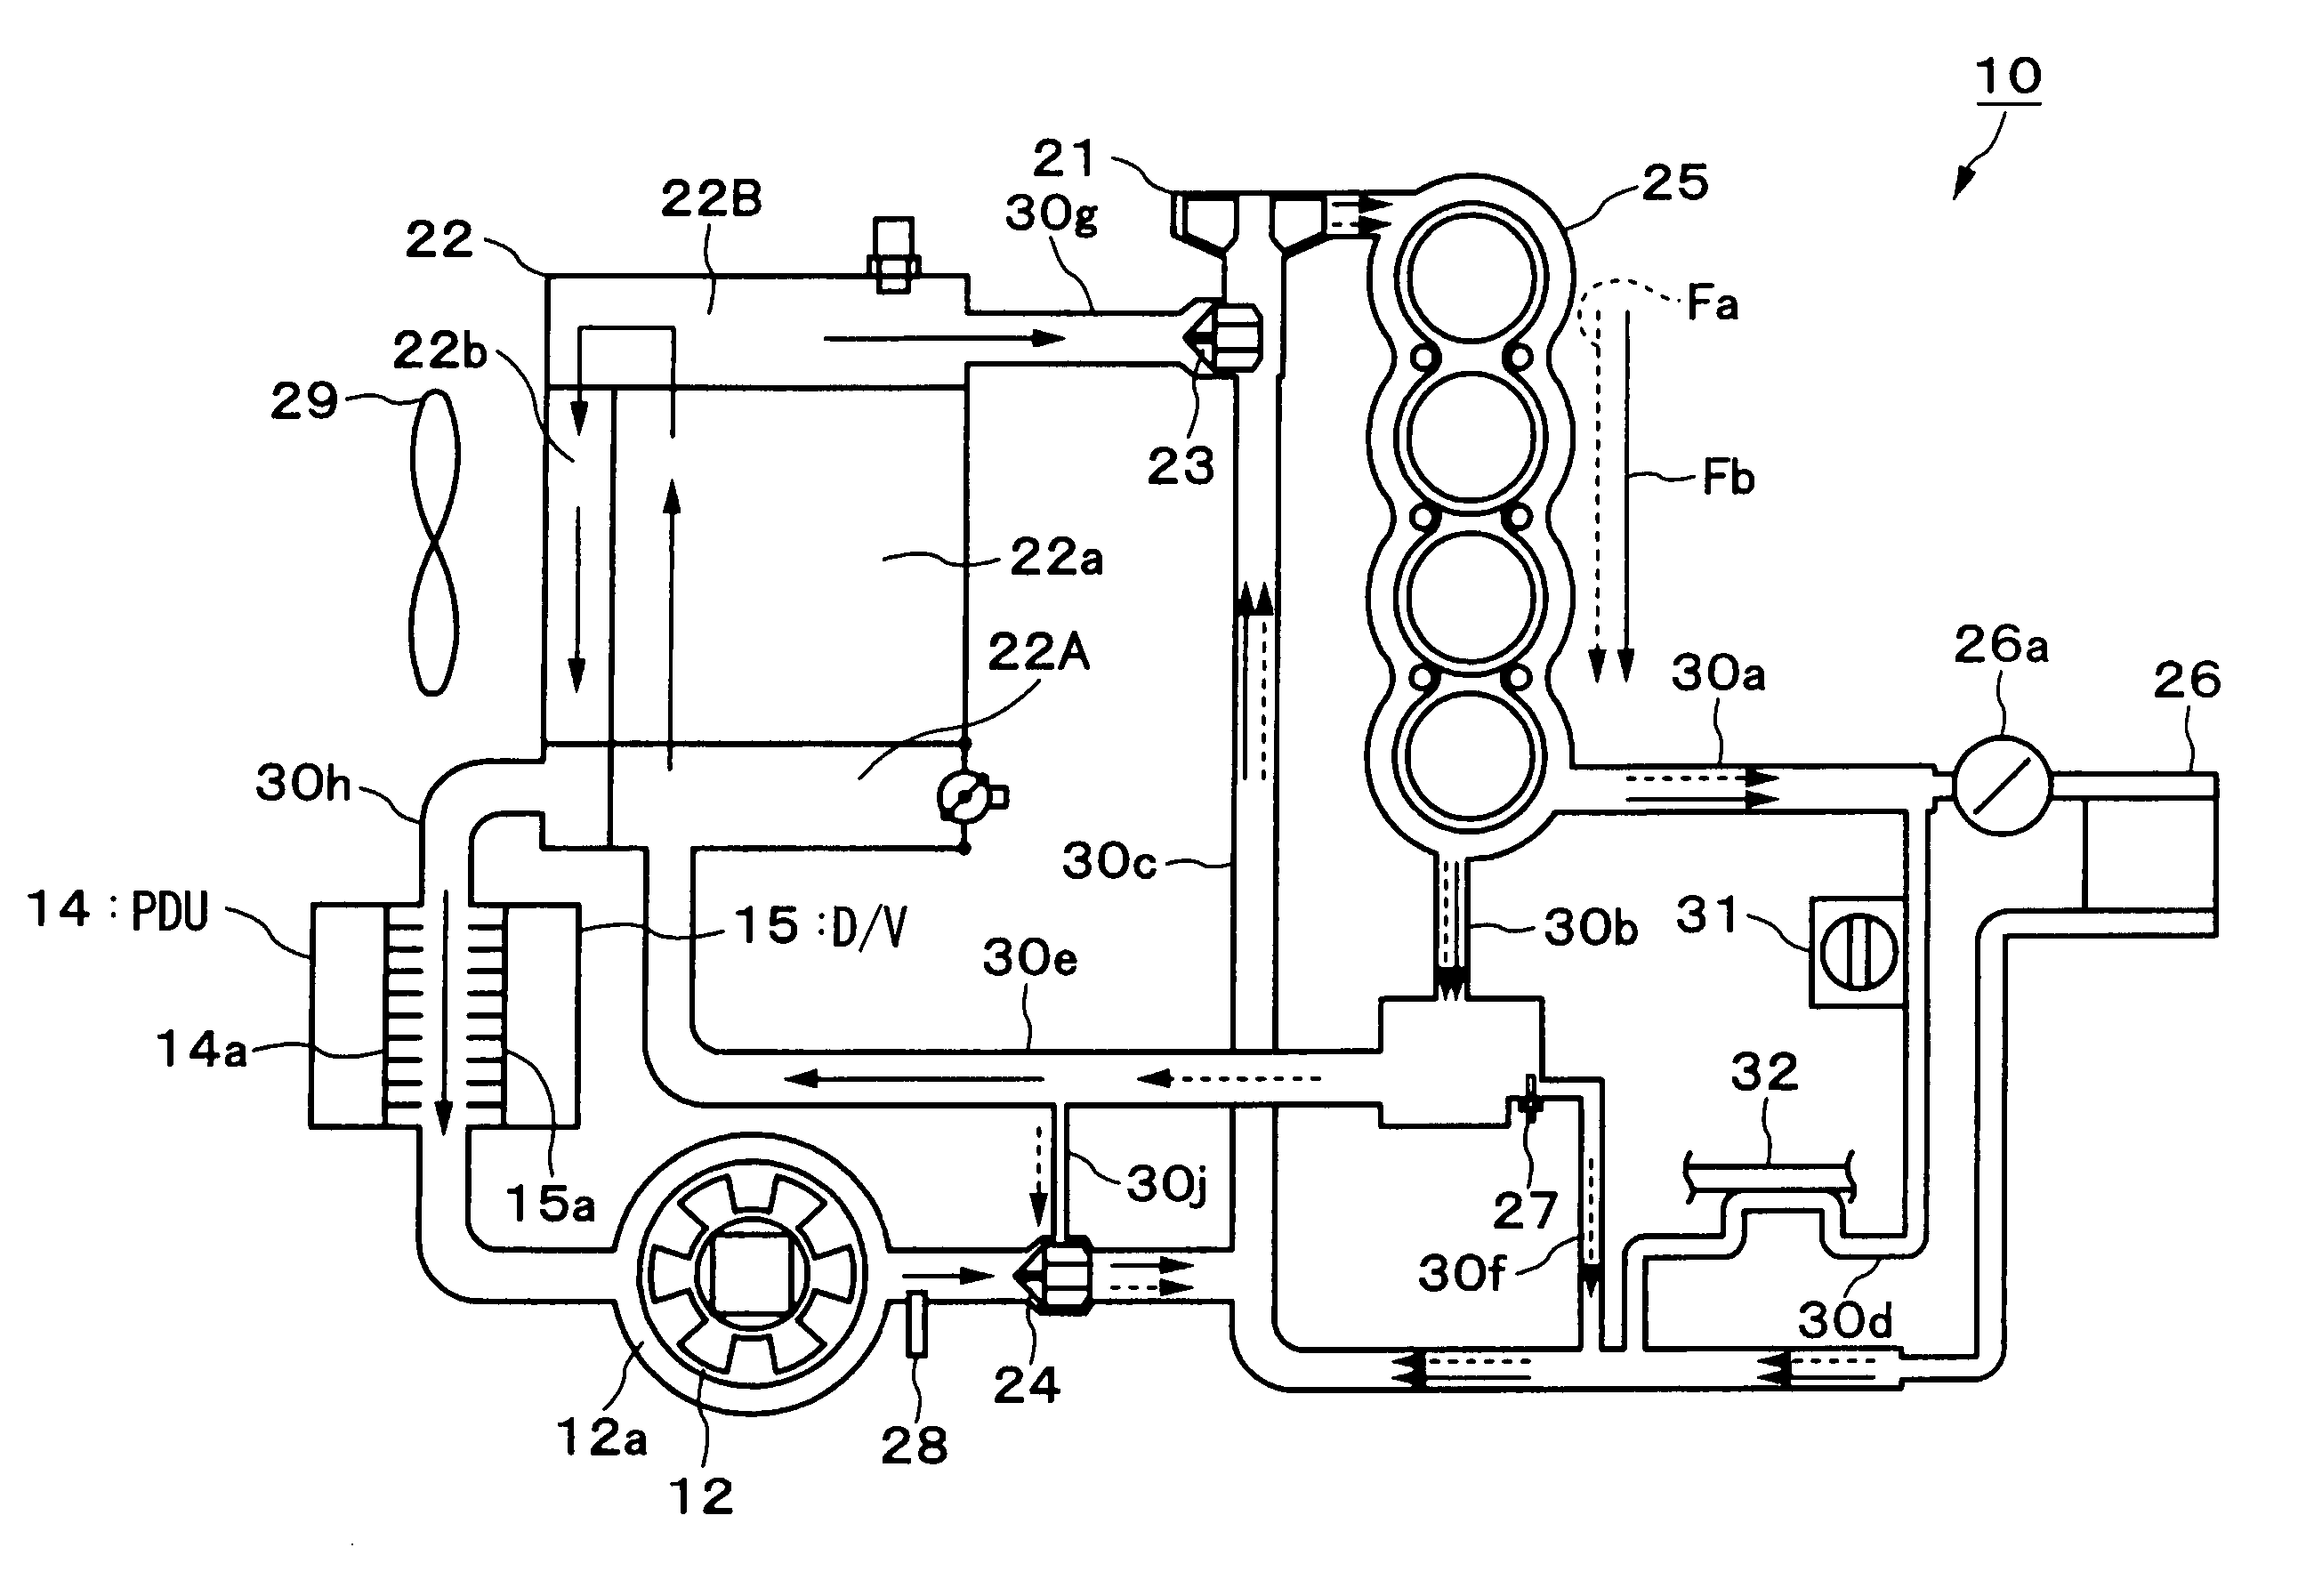 Cooling apparatus for hybrid vehicle